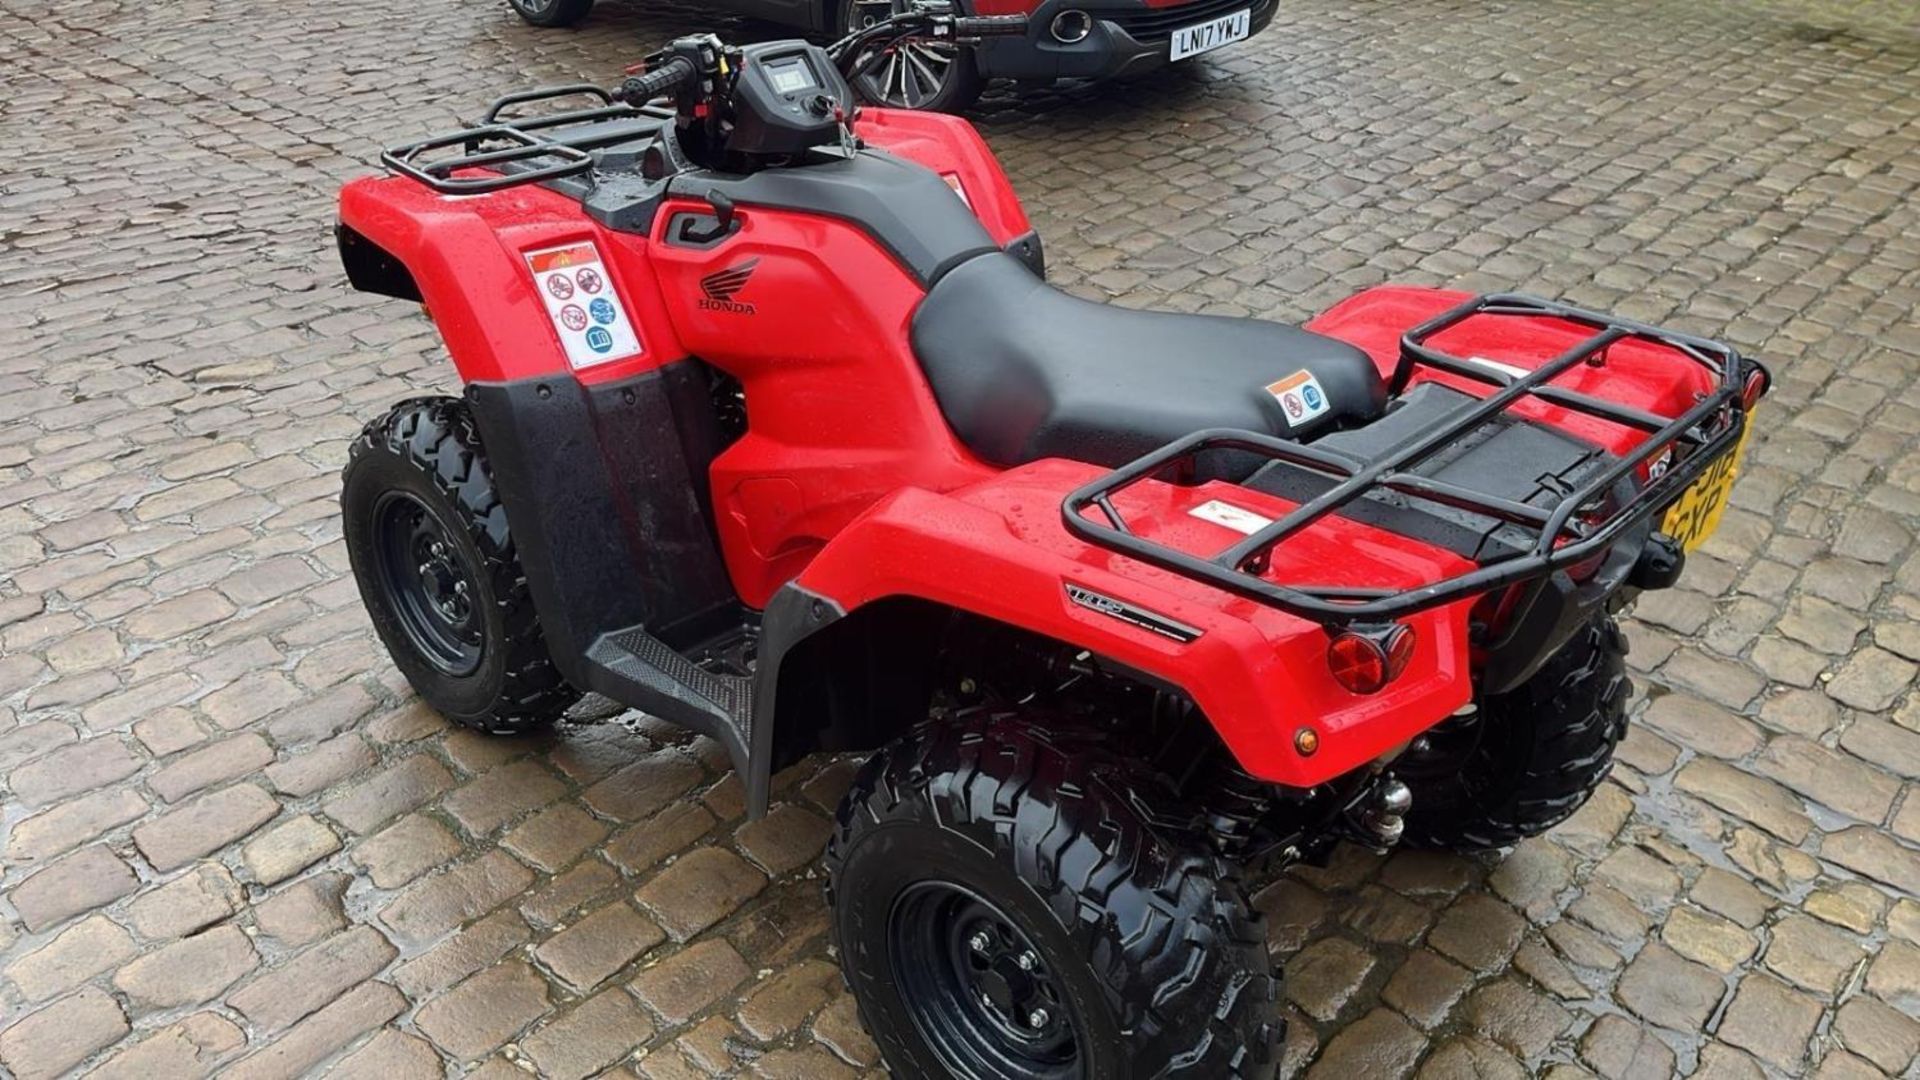 2018 HONDA TRX420FA6 FOURTRAX RANCHER AUTOMATIC DCT QUAD BIKE CAN BE SWITCED FROM 2 TO 4 WHEEL DRIVE - Image 15 of 21